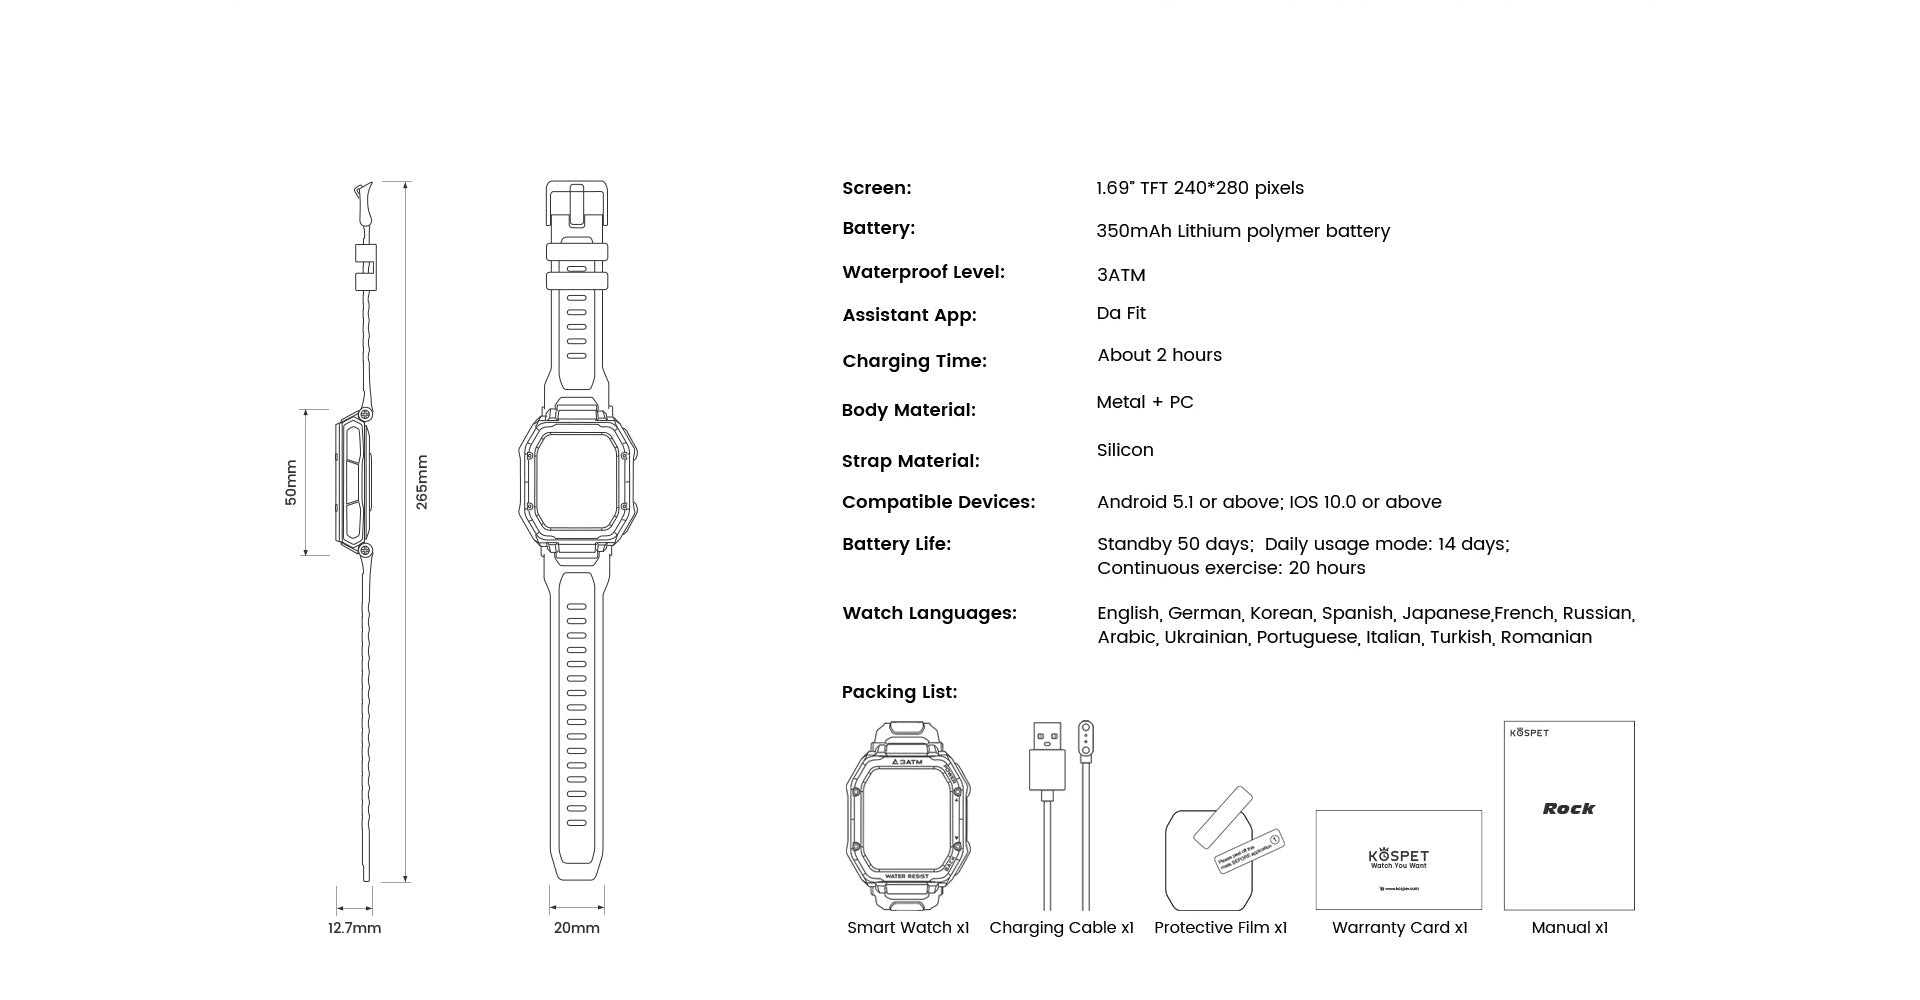 SPECIFICATIONS of KOSPET ROCK Rugged Smartwatch